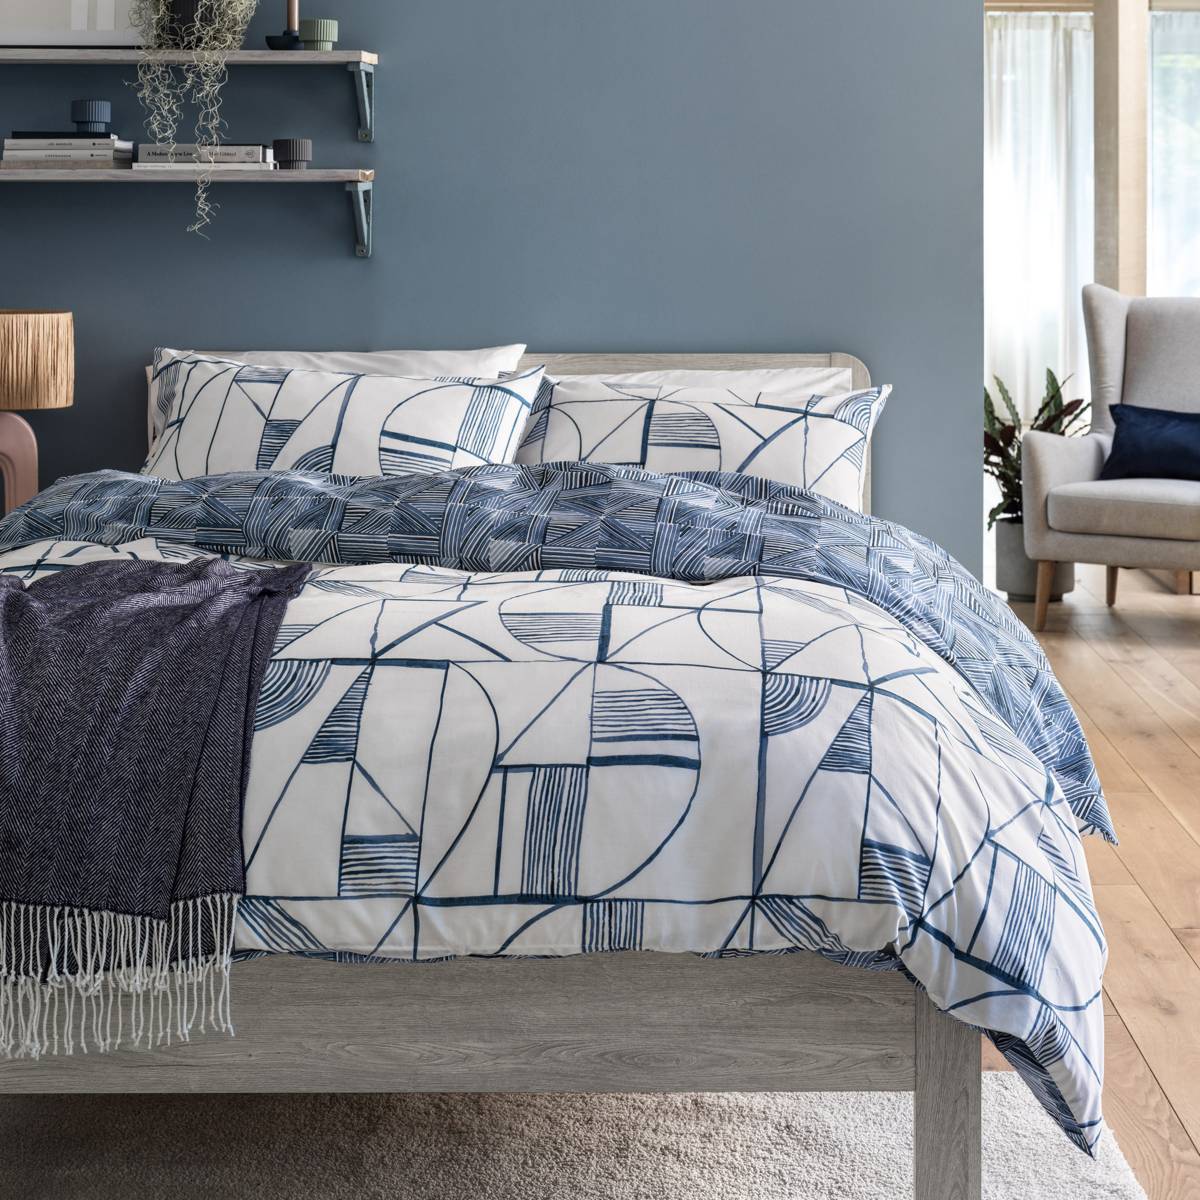 White and blue bedding with geometric pattern. Shop bedding